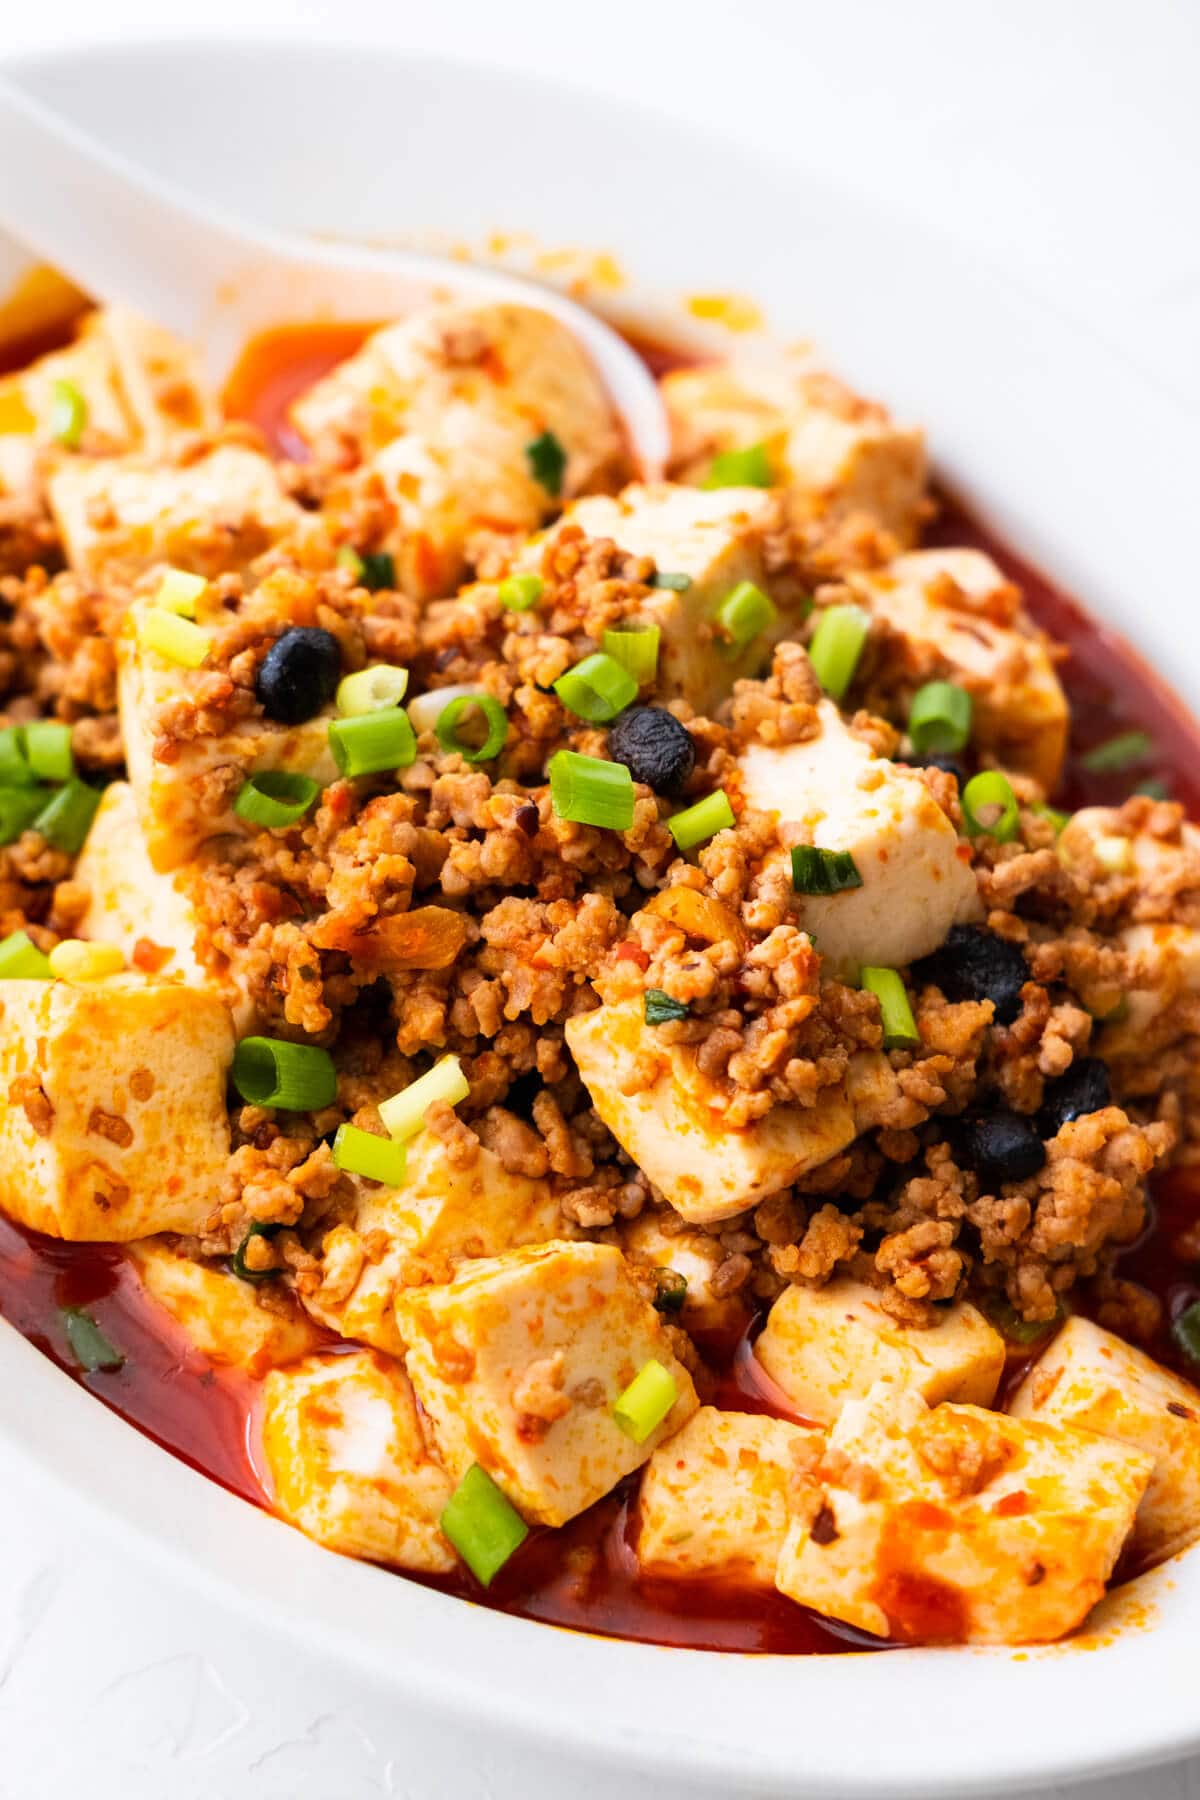 Easy mapo tofu recipe with delicious tofu and minced meat, with scallions on top.